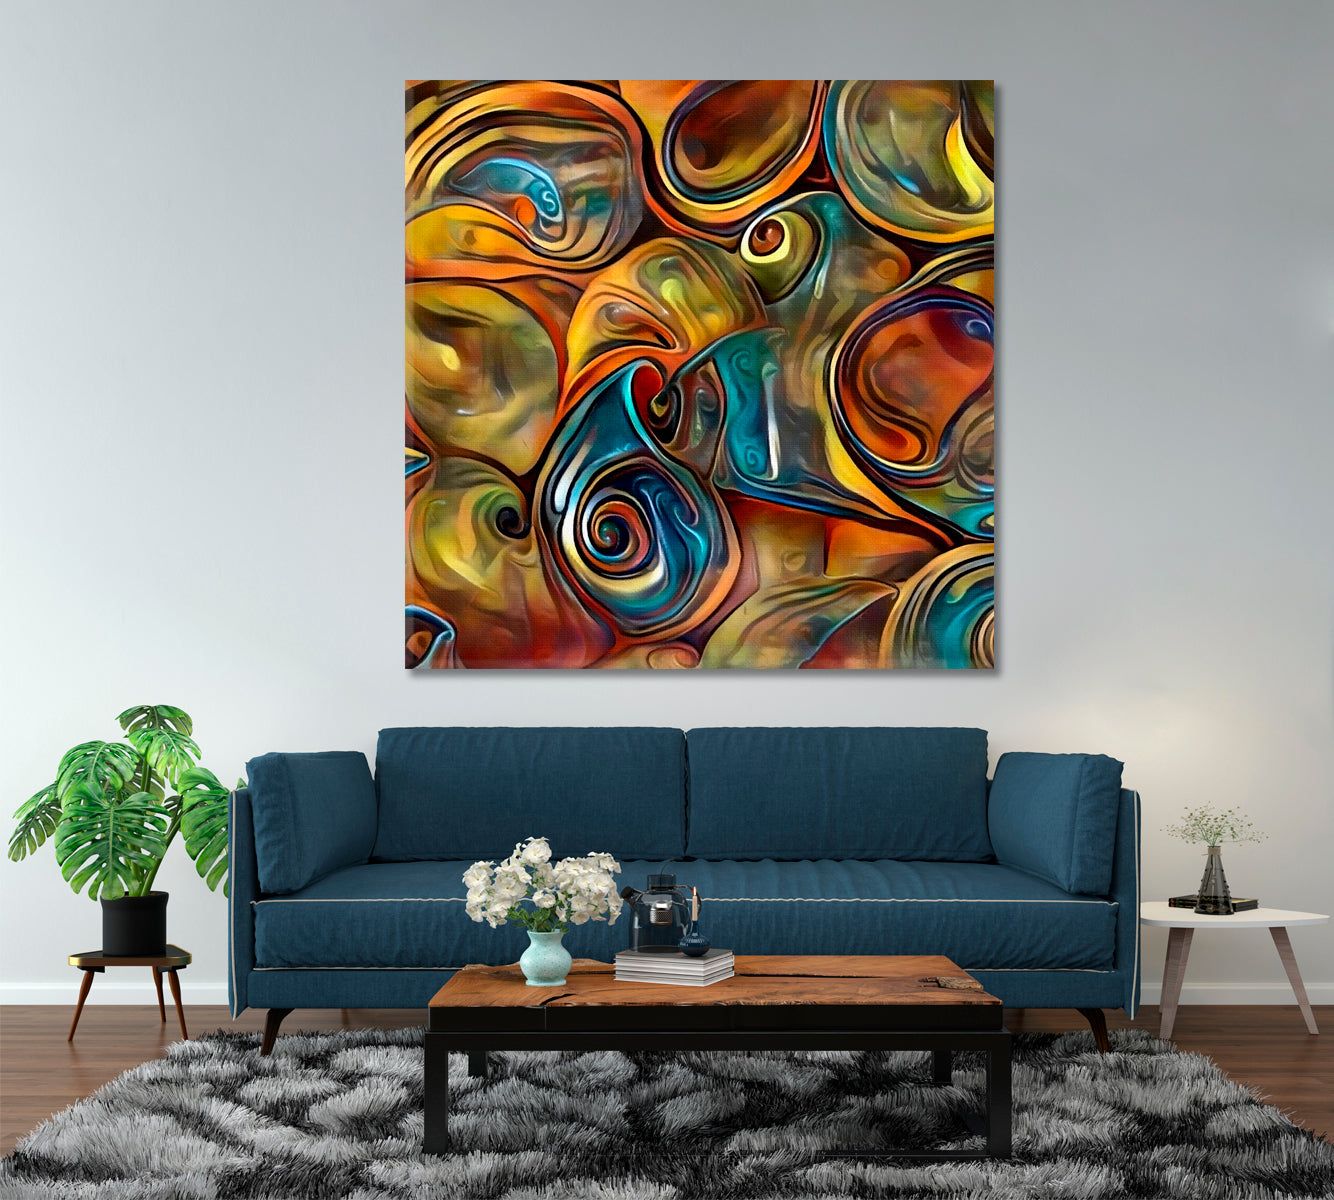 ABSTRACT SEASHELLS  Fluid Lines and Color Movement - Square Panel Abstract Art Print Artesty   